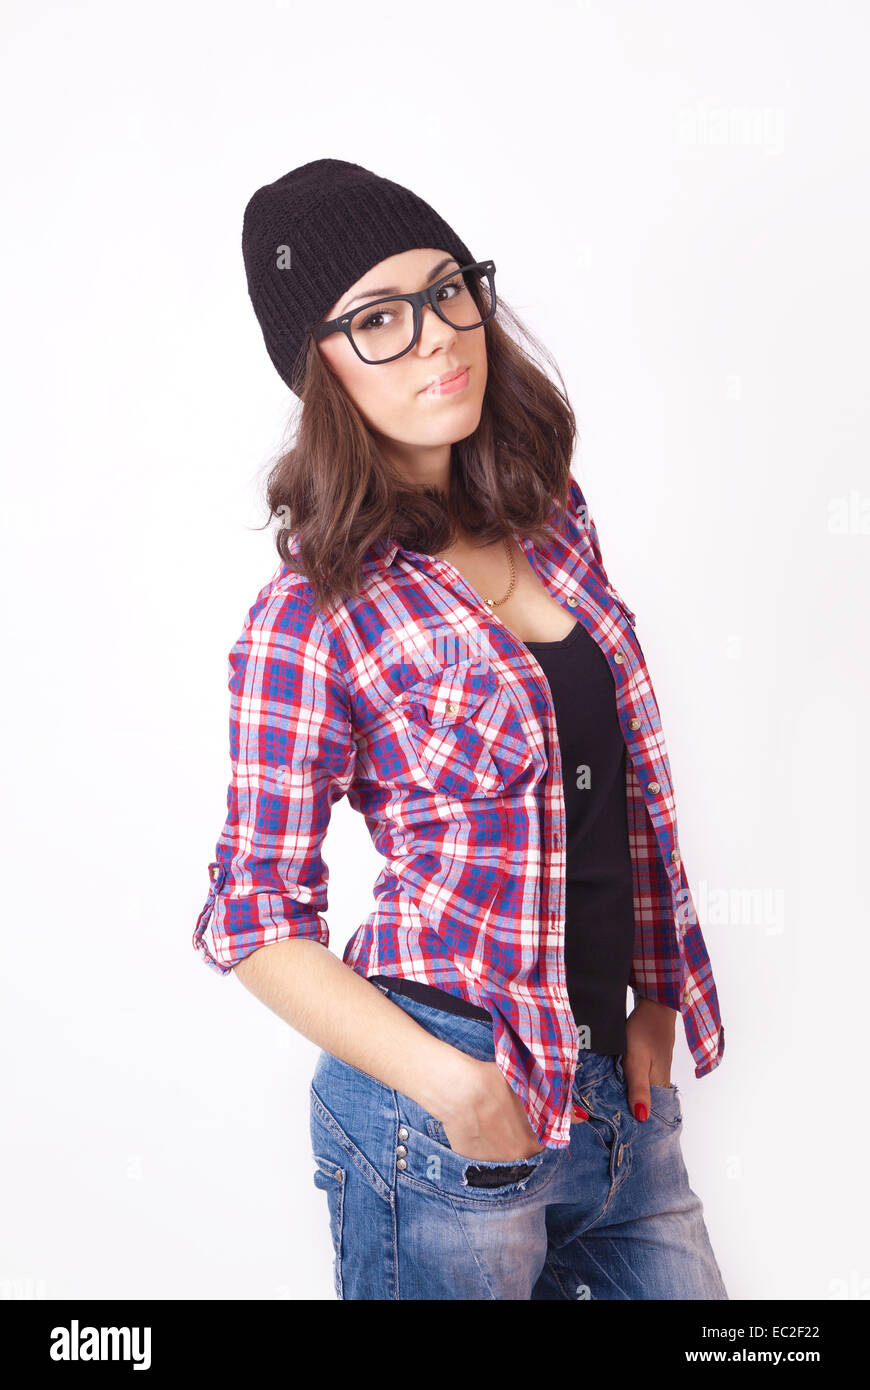 Fashion Aesthetic Portrait Woman Hipster Style Stock Photo 2347932623